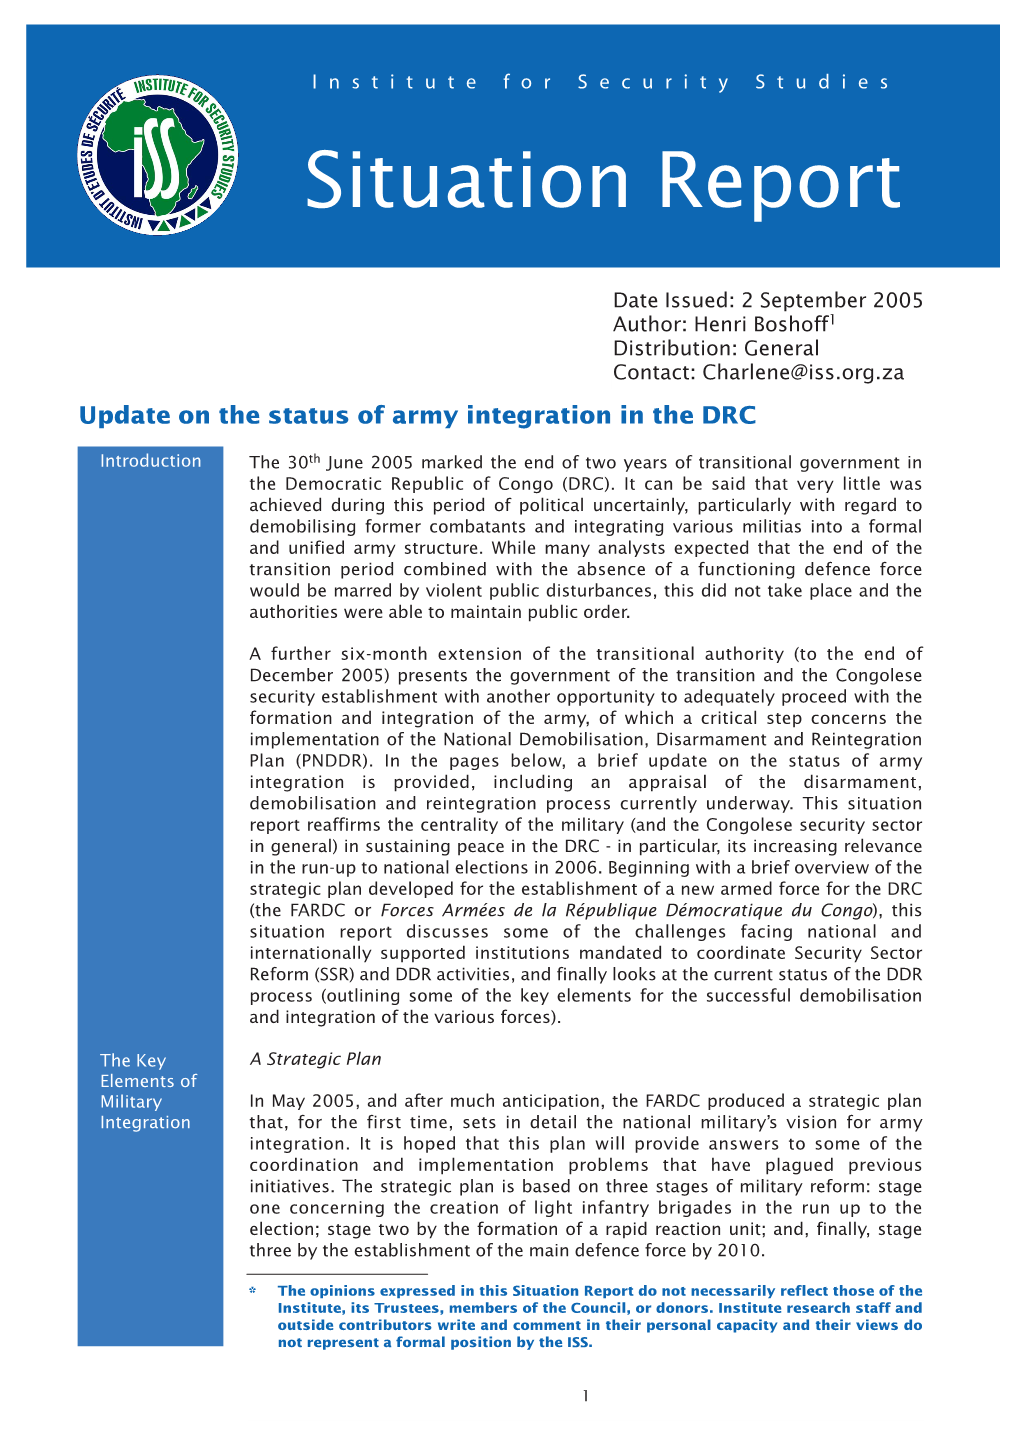 Update on the Status of Army Integration in the DRC